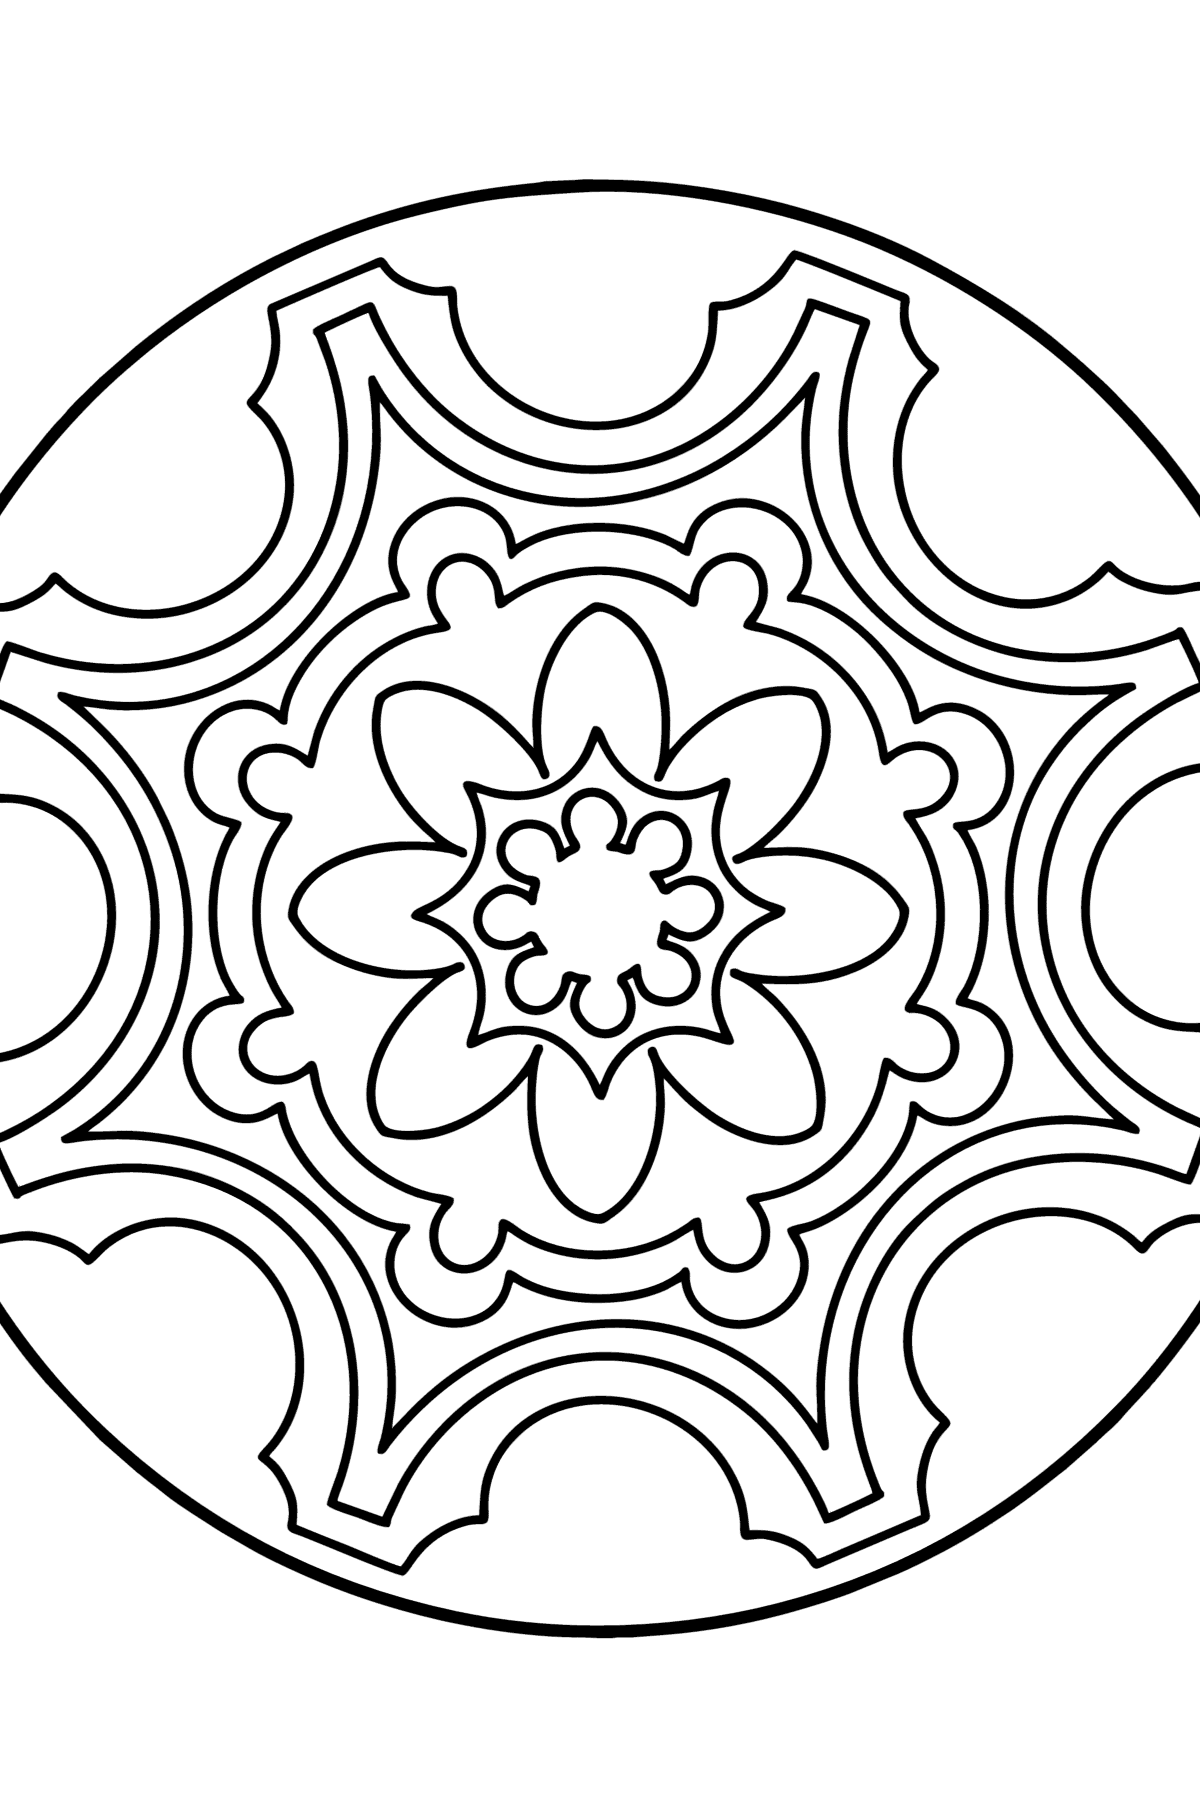 Mandala coloring page - 9 elements - Coloring Pages for Kids